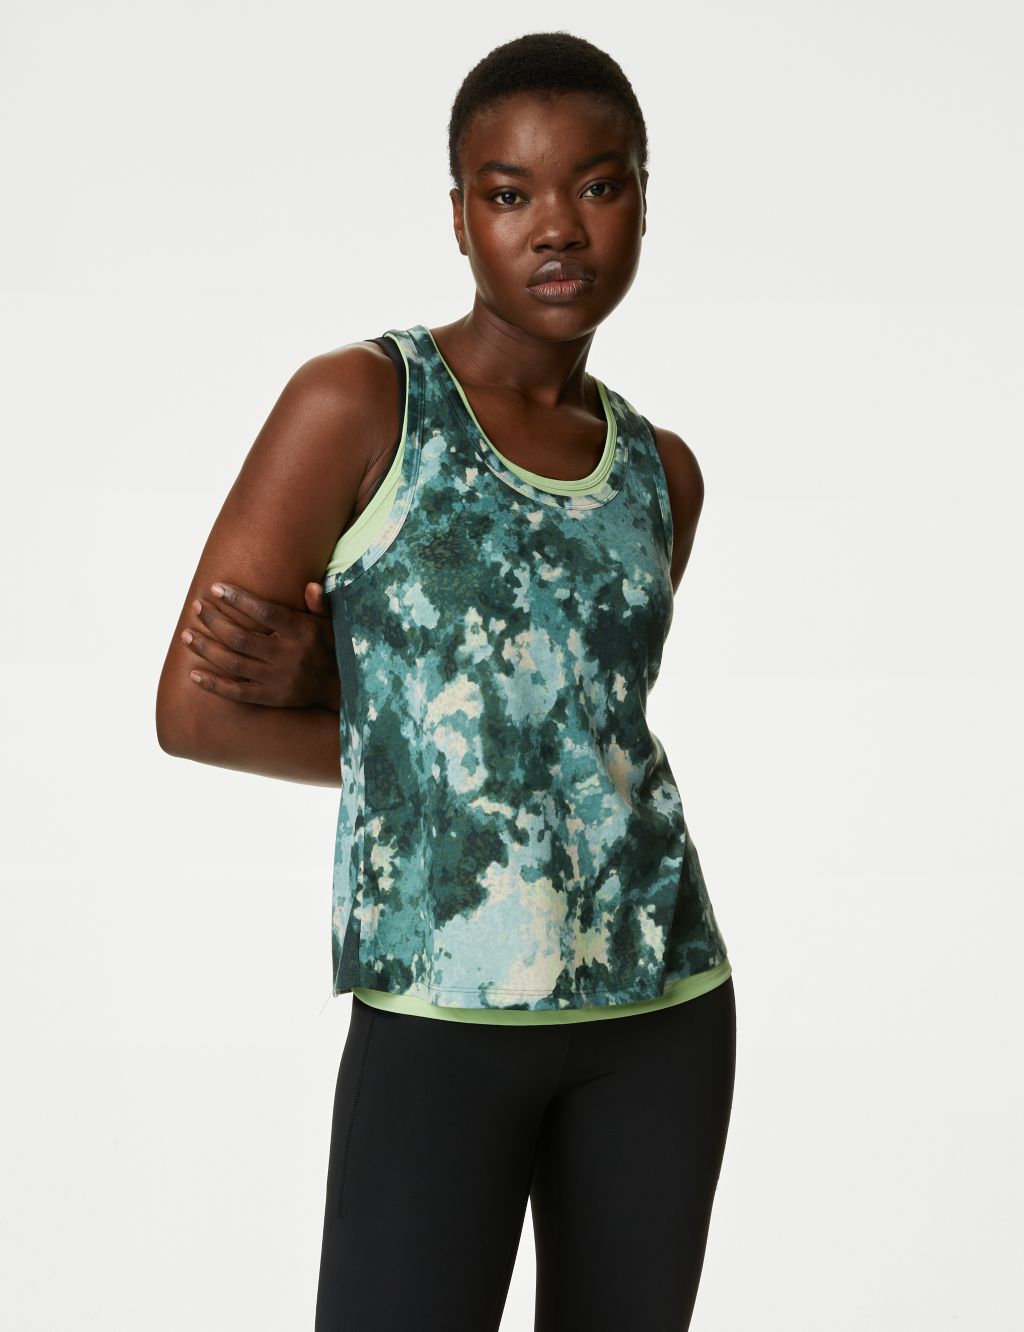 Shades Of Cool C - Yoga Vest Top for Women